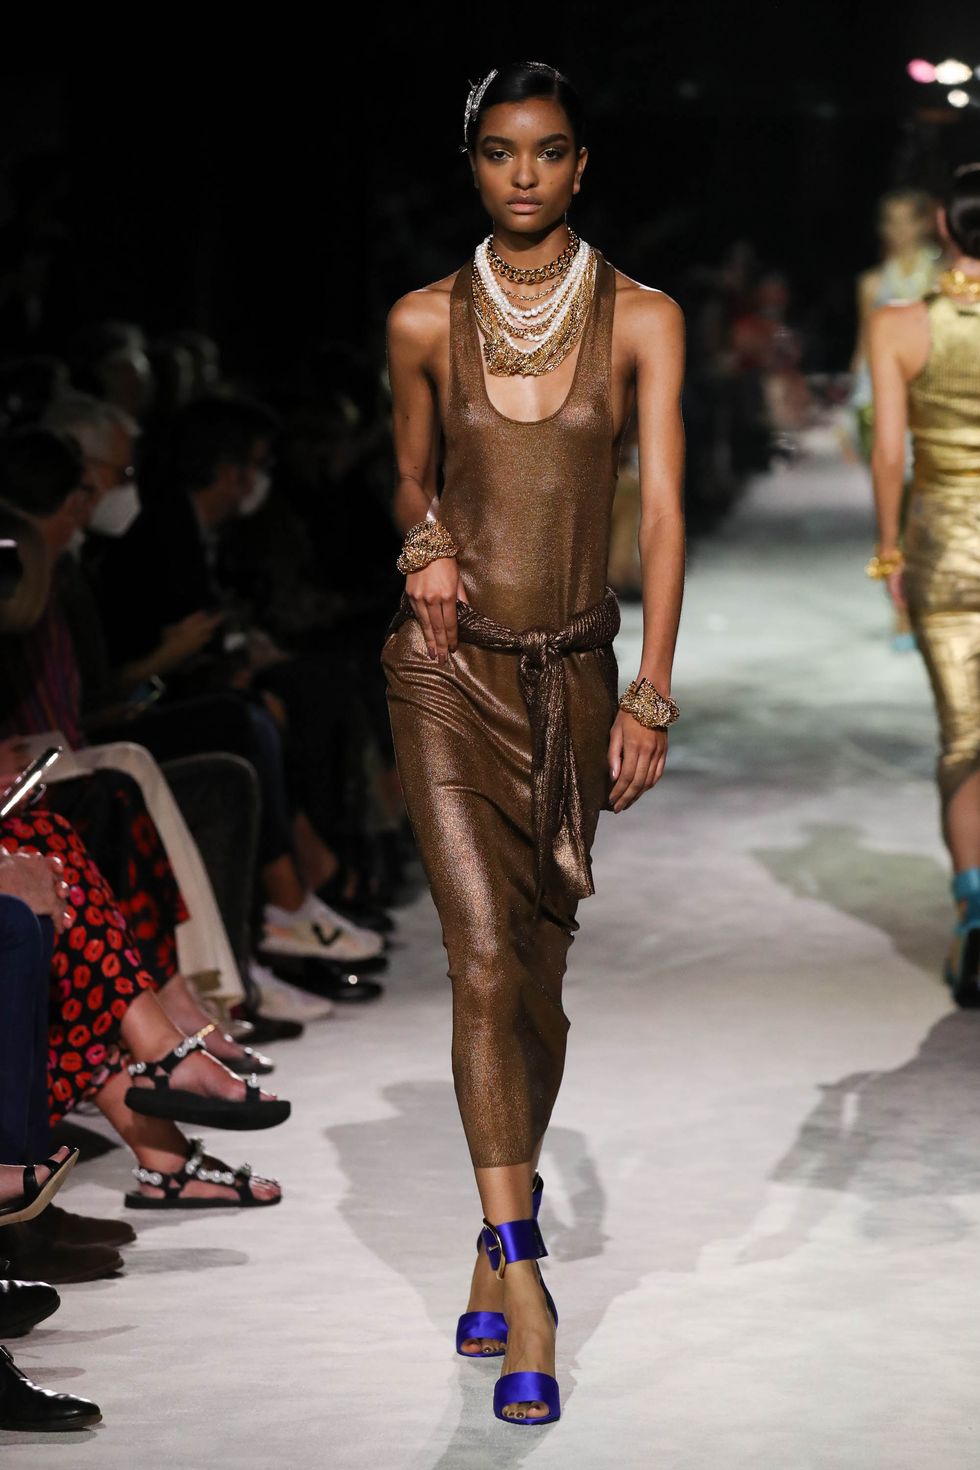 New York Fashion Week 2021 highlights in pictures